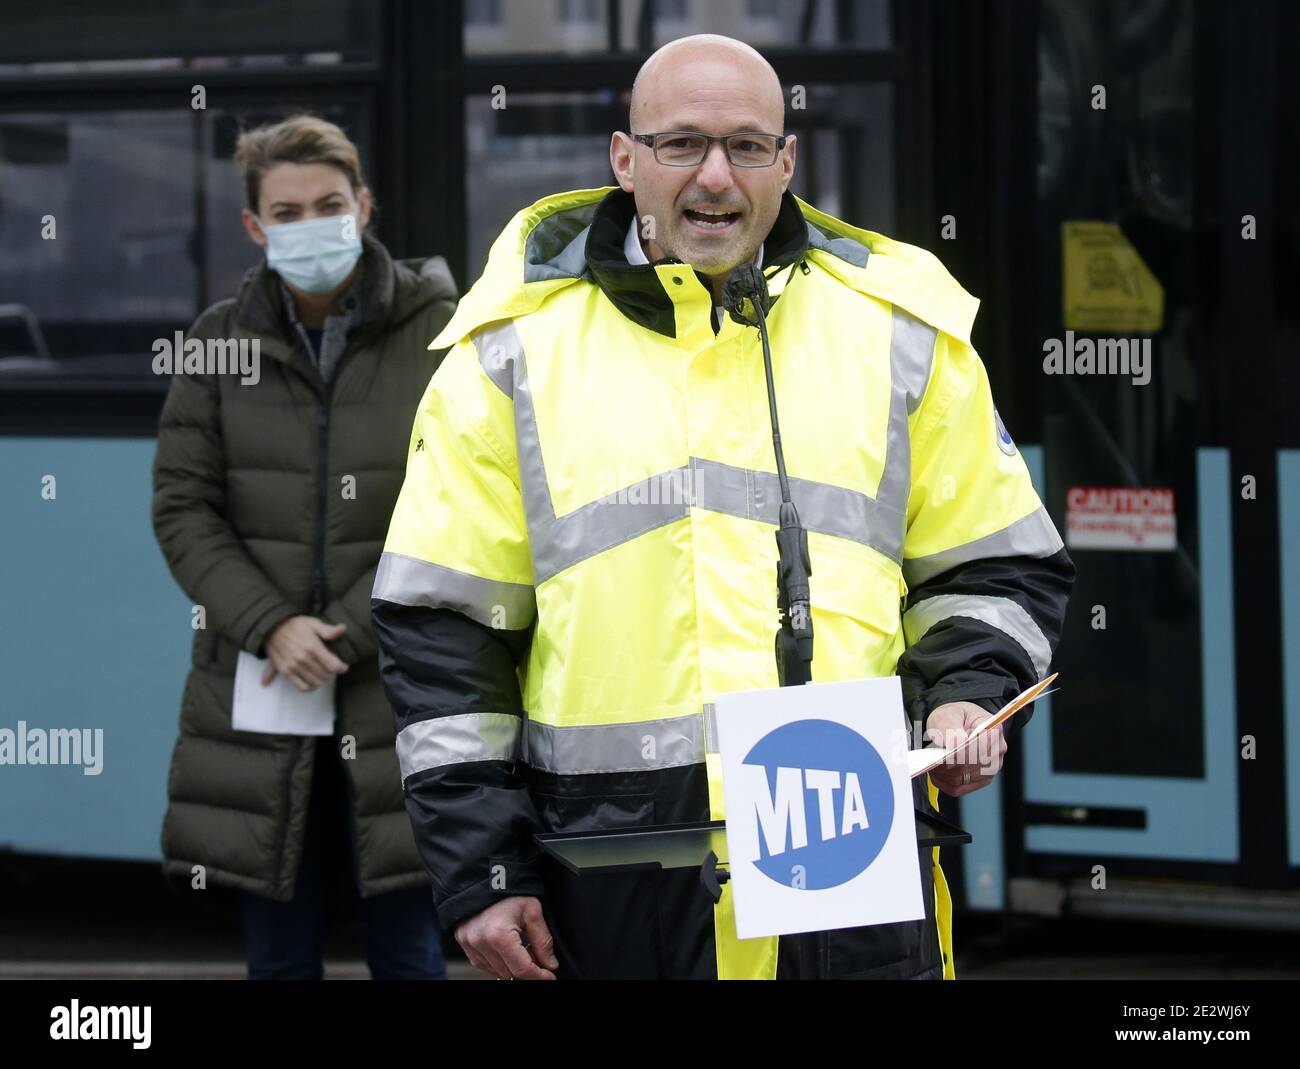 New York, United States. 15th Jan, 2021. President MTA Bus; Sr. VP, NYCT Department of Buses Craig Cipriano speaks at a press conference after eight people were injured when a tandem MTA city bus crashed and was left hanging off a New York City overpass Thursday night in New York City on Friday, January 15, 2021. Photo by John Angelillo/UPI Credit: UPI/Alamy Live News Stock Photo